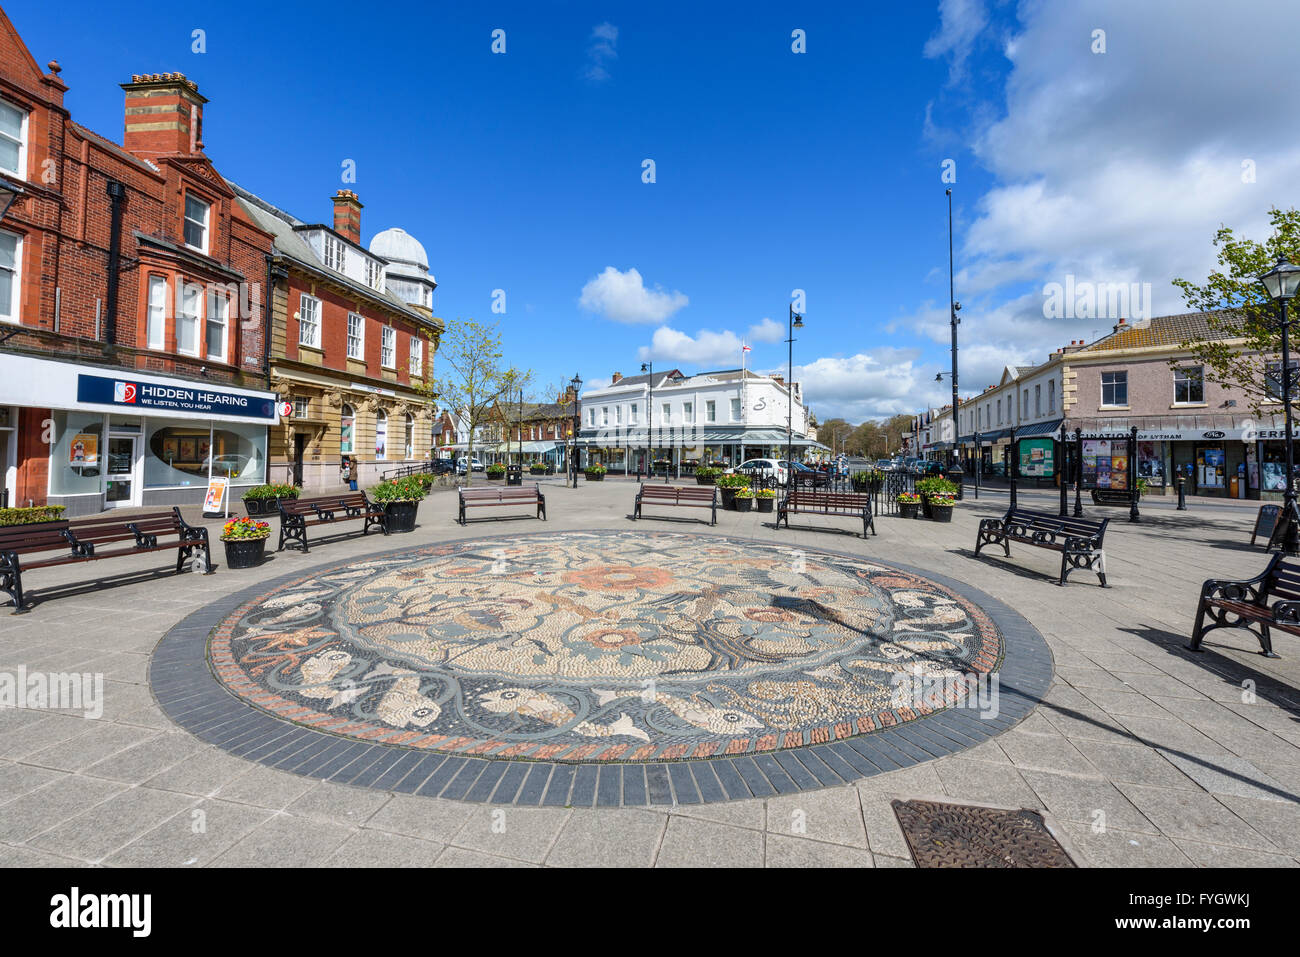 Central pedestrianised piazza in Lytham, Lancashire, UK showing the large mosaic Stock Photo